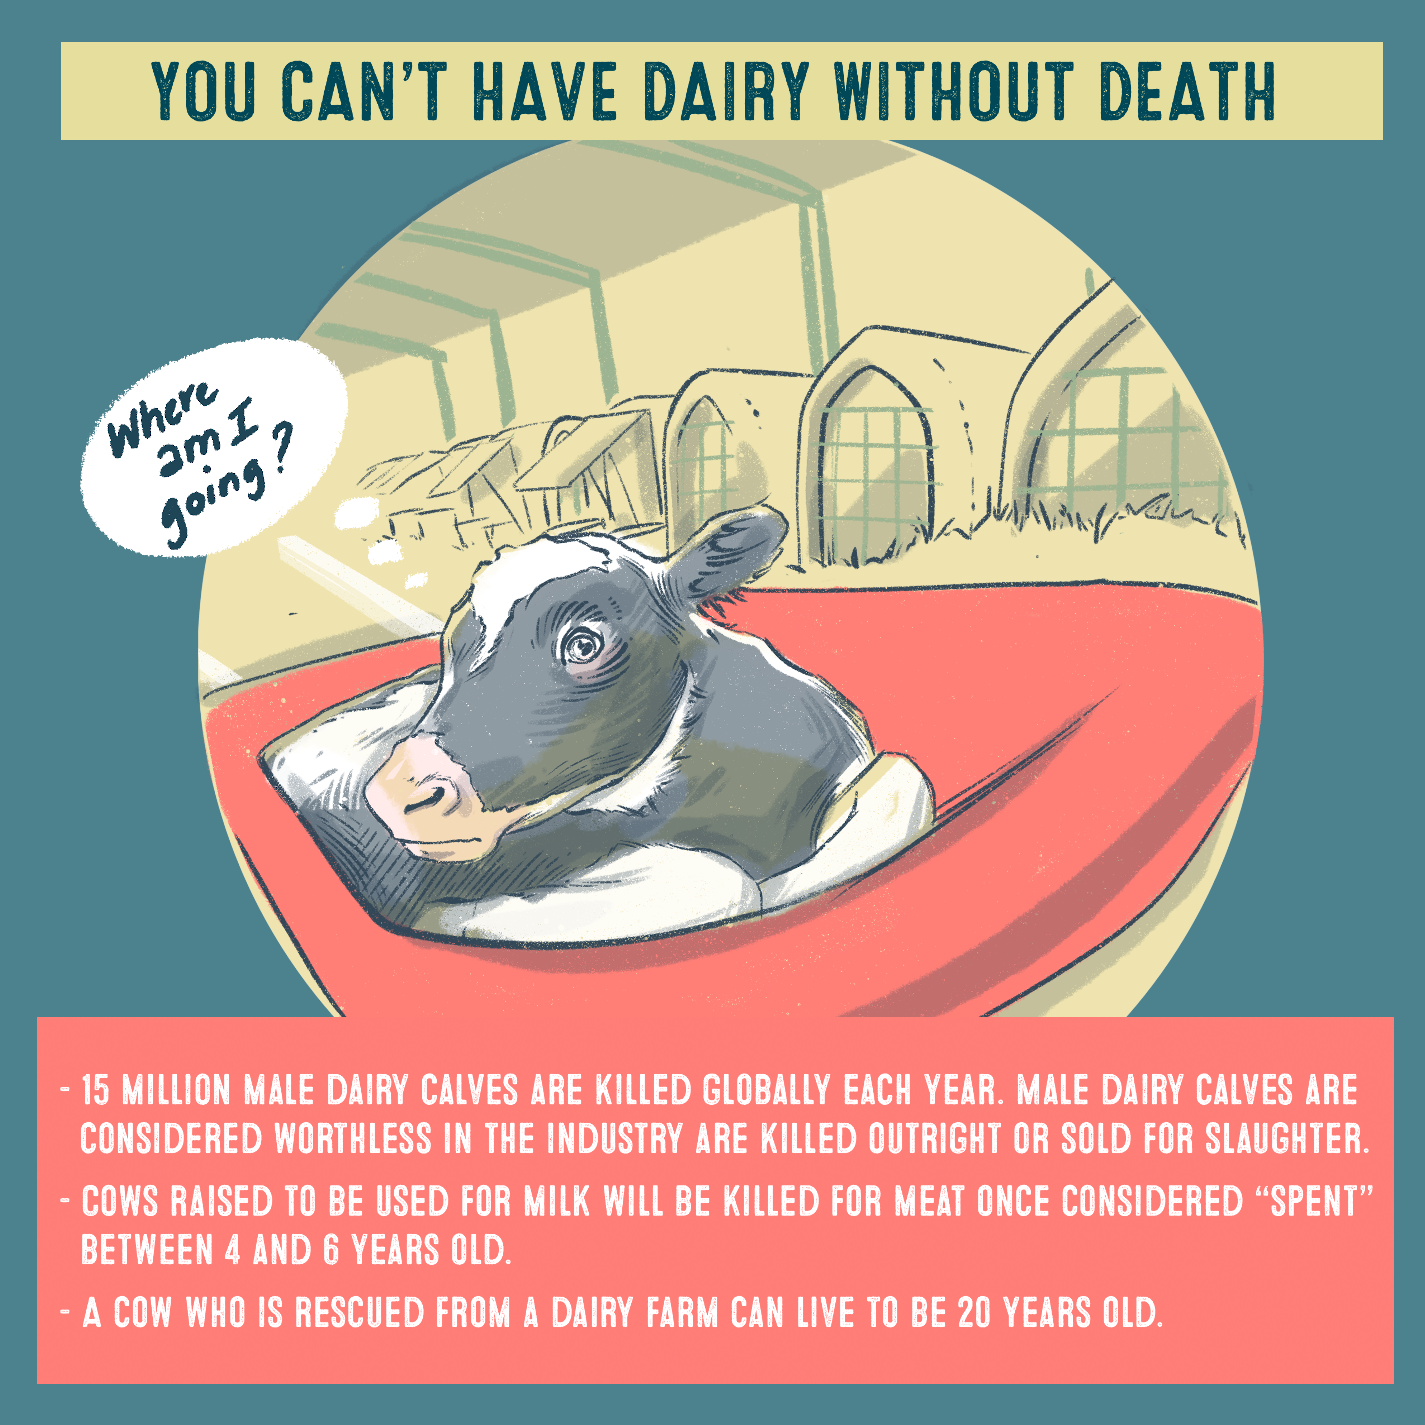 You can’t have dairy without death Where am I going? 15 million make dairy calves are killed globally each year. Male dairy calves are considered worthless in the industry are killed outright or sold for slaughter. Cows raised to be used for milk will be killed for meat once considered spent between 4 and 6 years old.  A cow can live up to 20 years old. They don’t get to reture, or live out their full lives as they deserve.